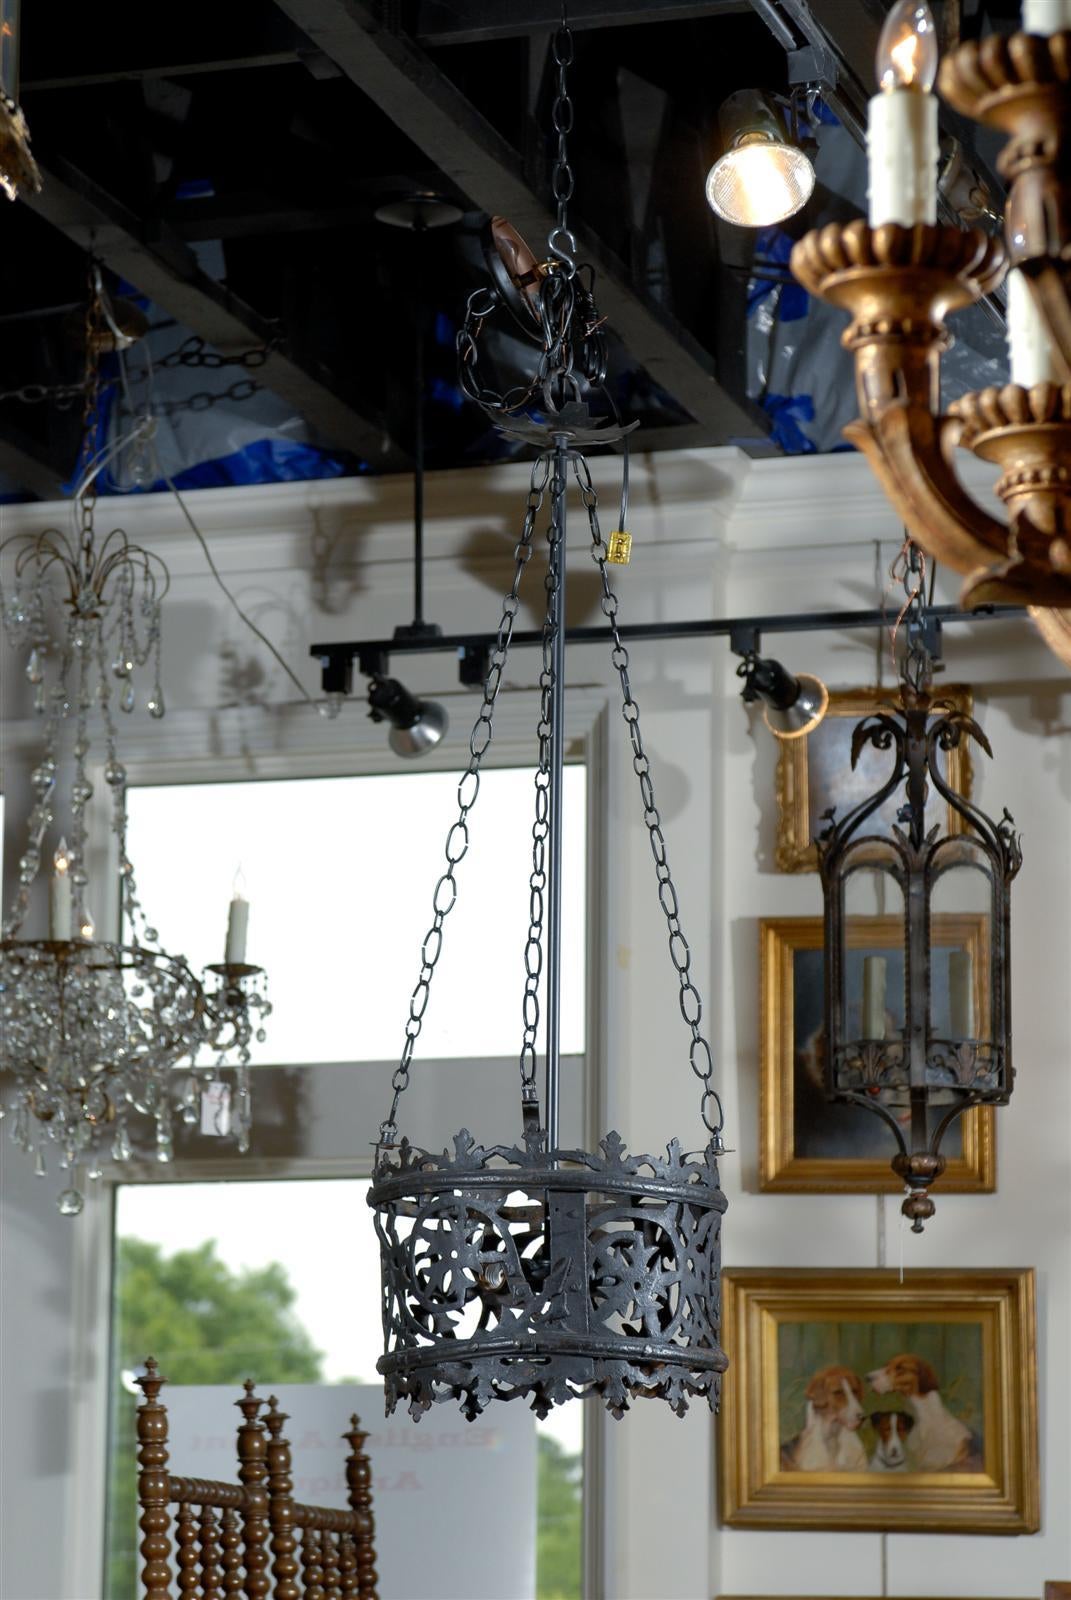 An Italian wrought iron chandelier with frosted glass from the mid-20th century. This round Italian chandelier features an elegant filigreed drum with a stylized fleur-de-lis decoration on both the top and bottom as well as a snowflake motif in the